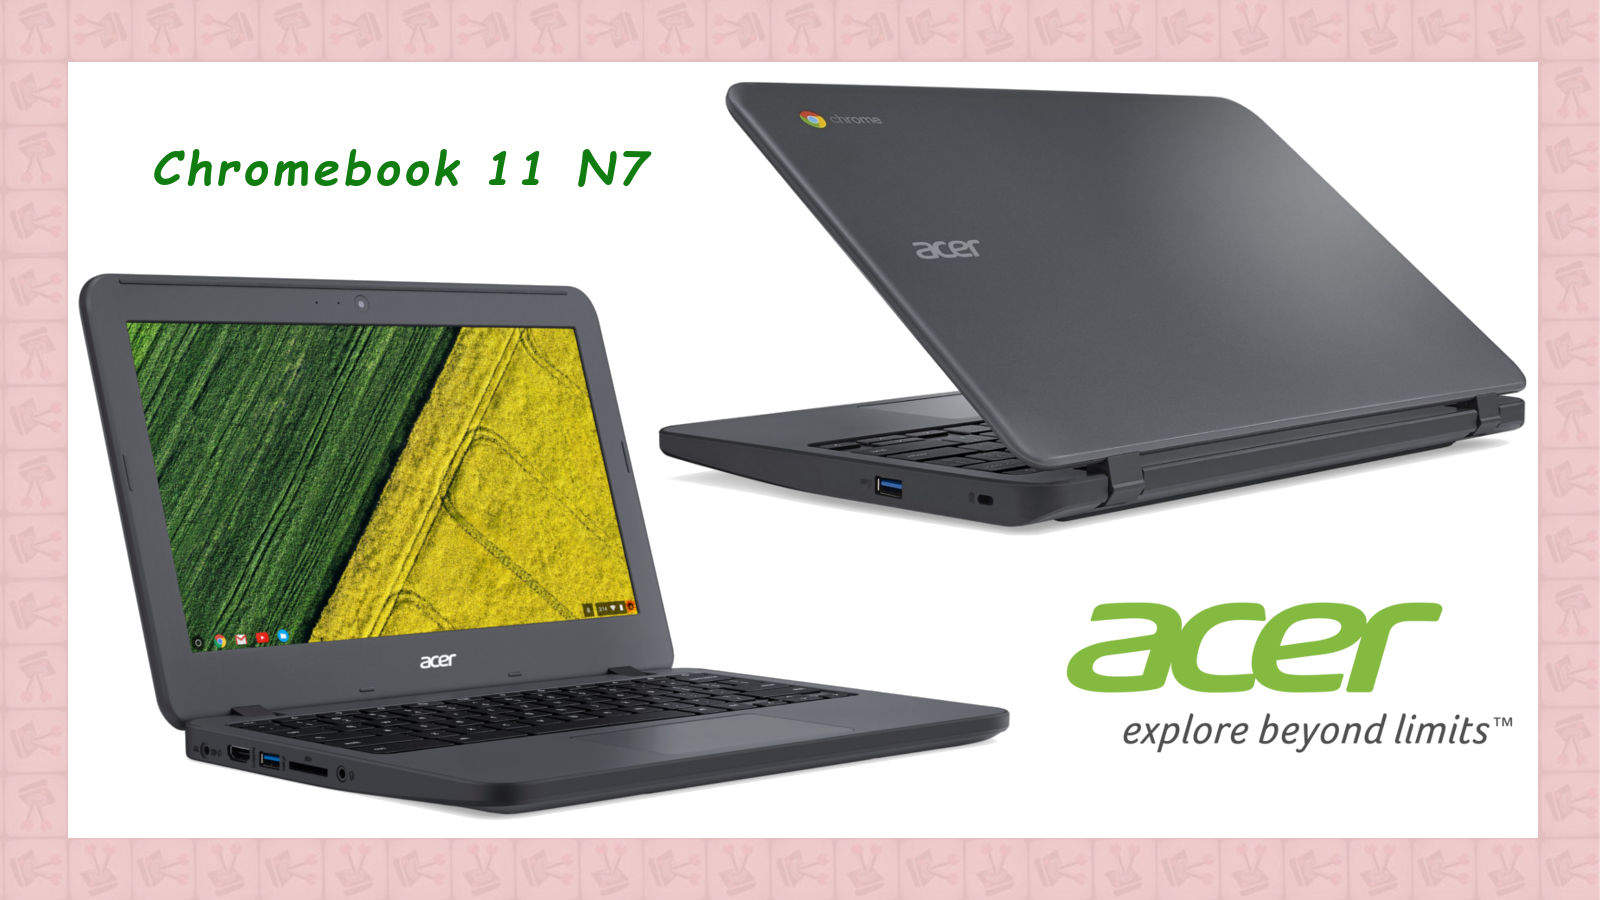 Vamers - FYI - Gadgetology - Acer unveils its tough-as-nails Chromebook 11 N7 - 01